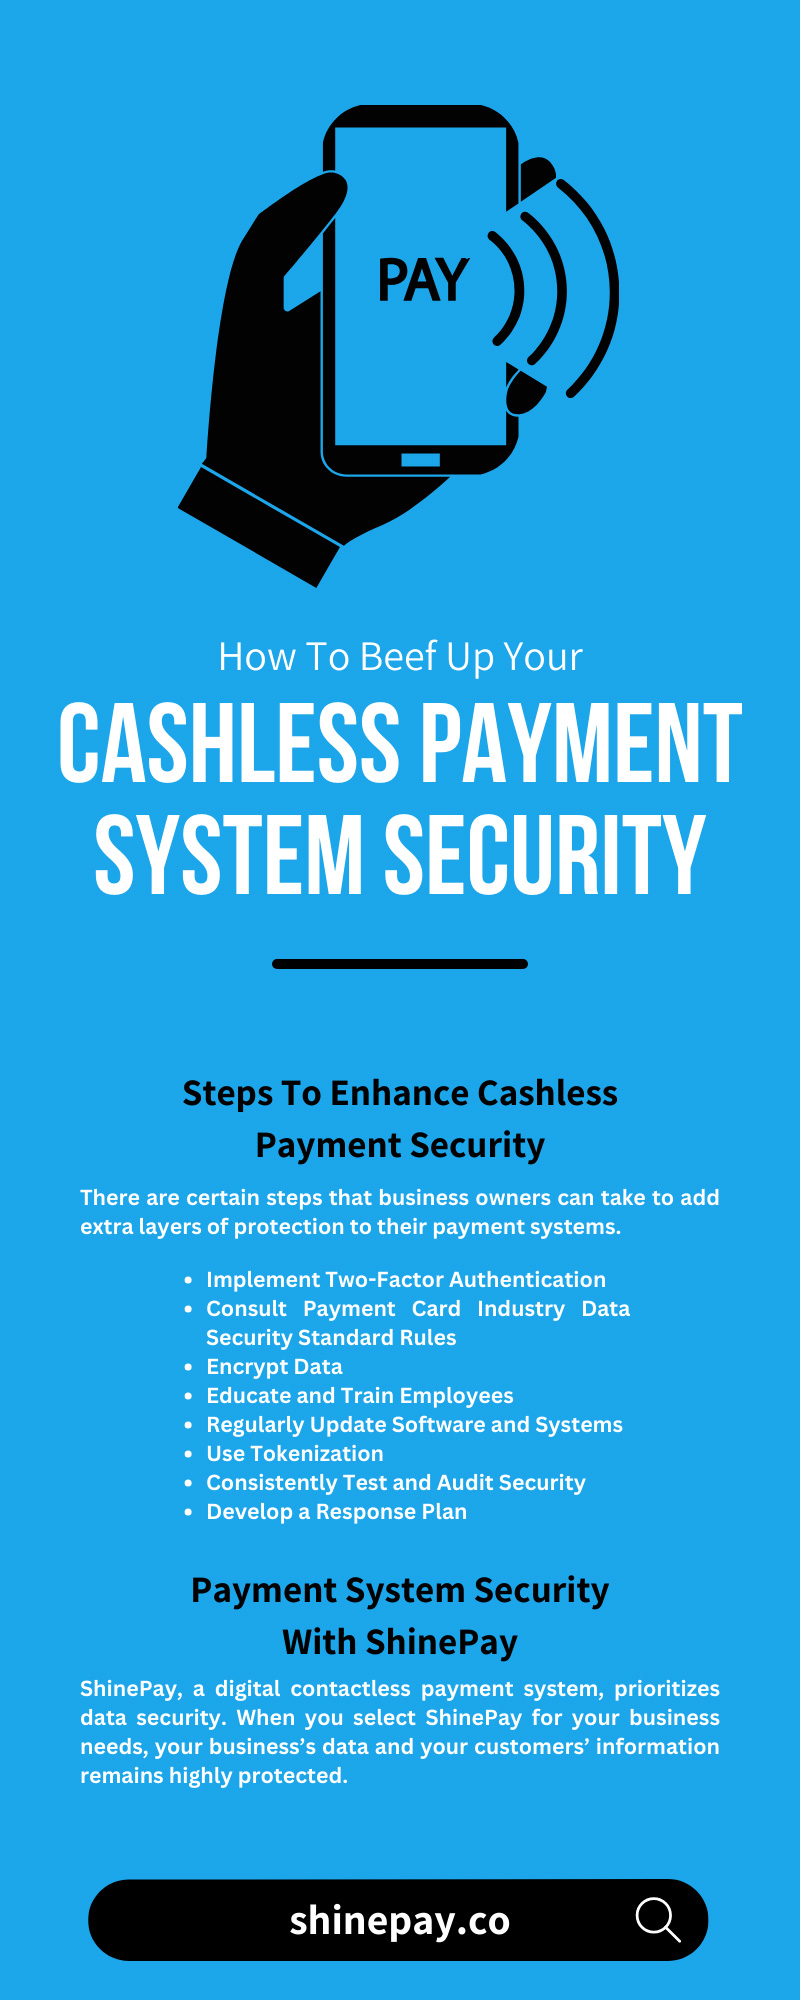 How To Beef Up Your Cashless Payment System Security
